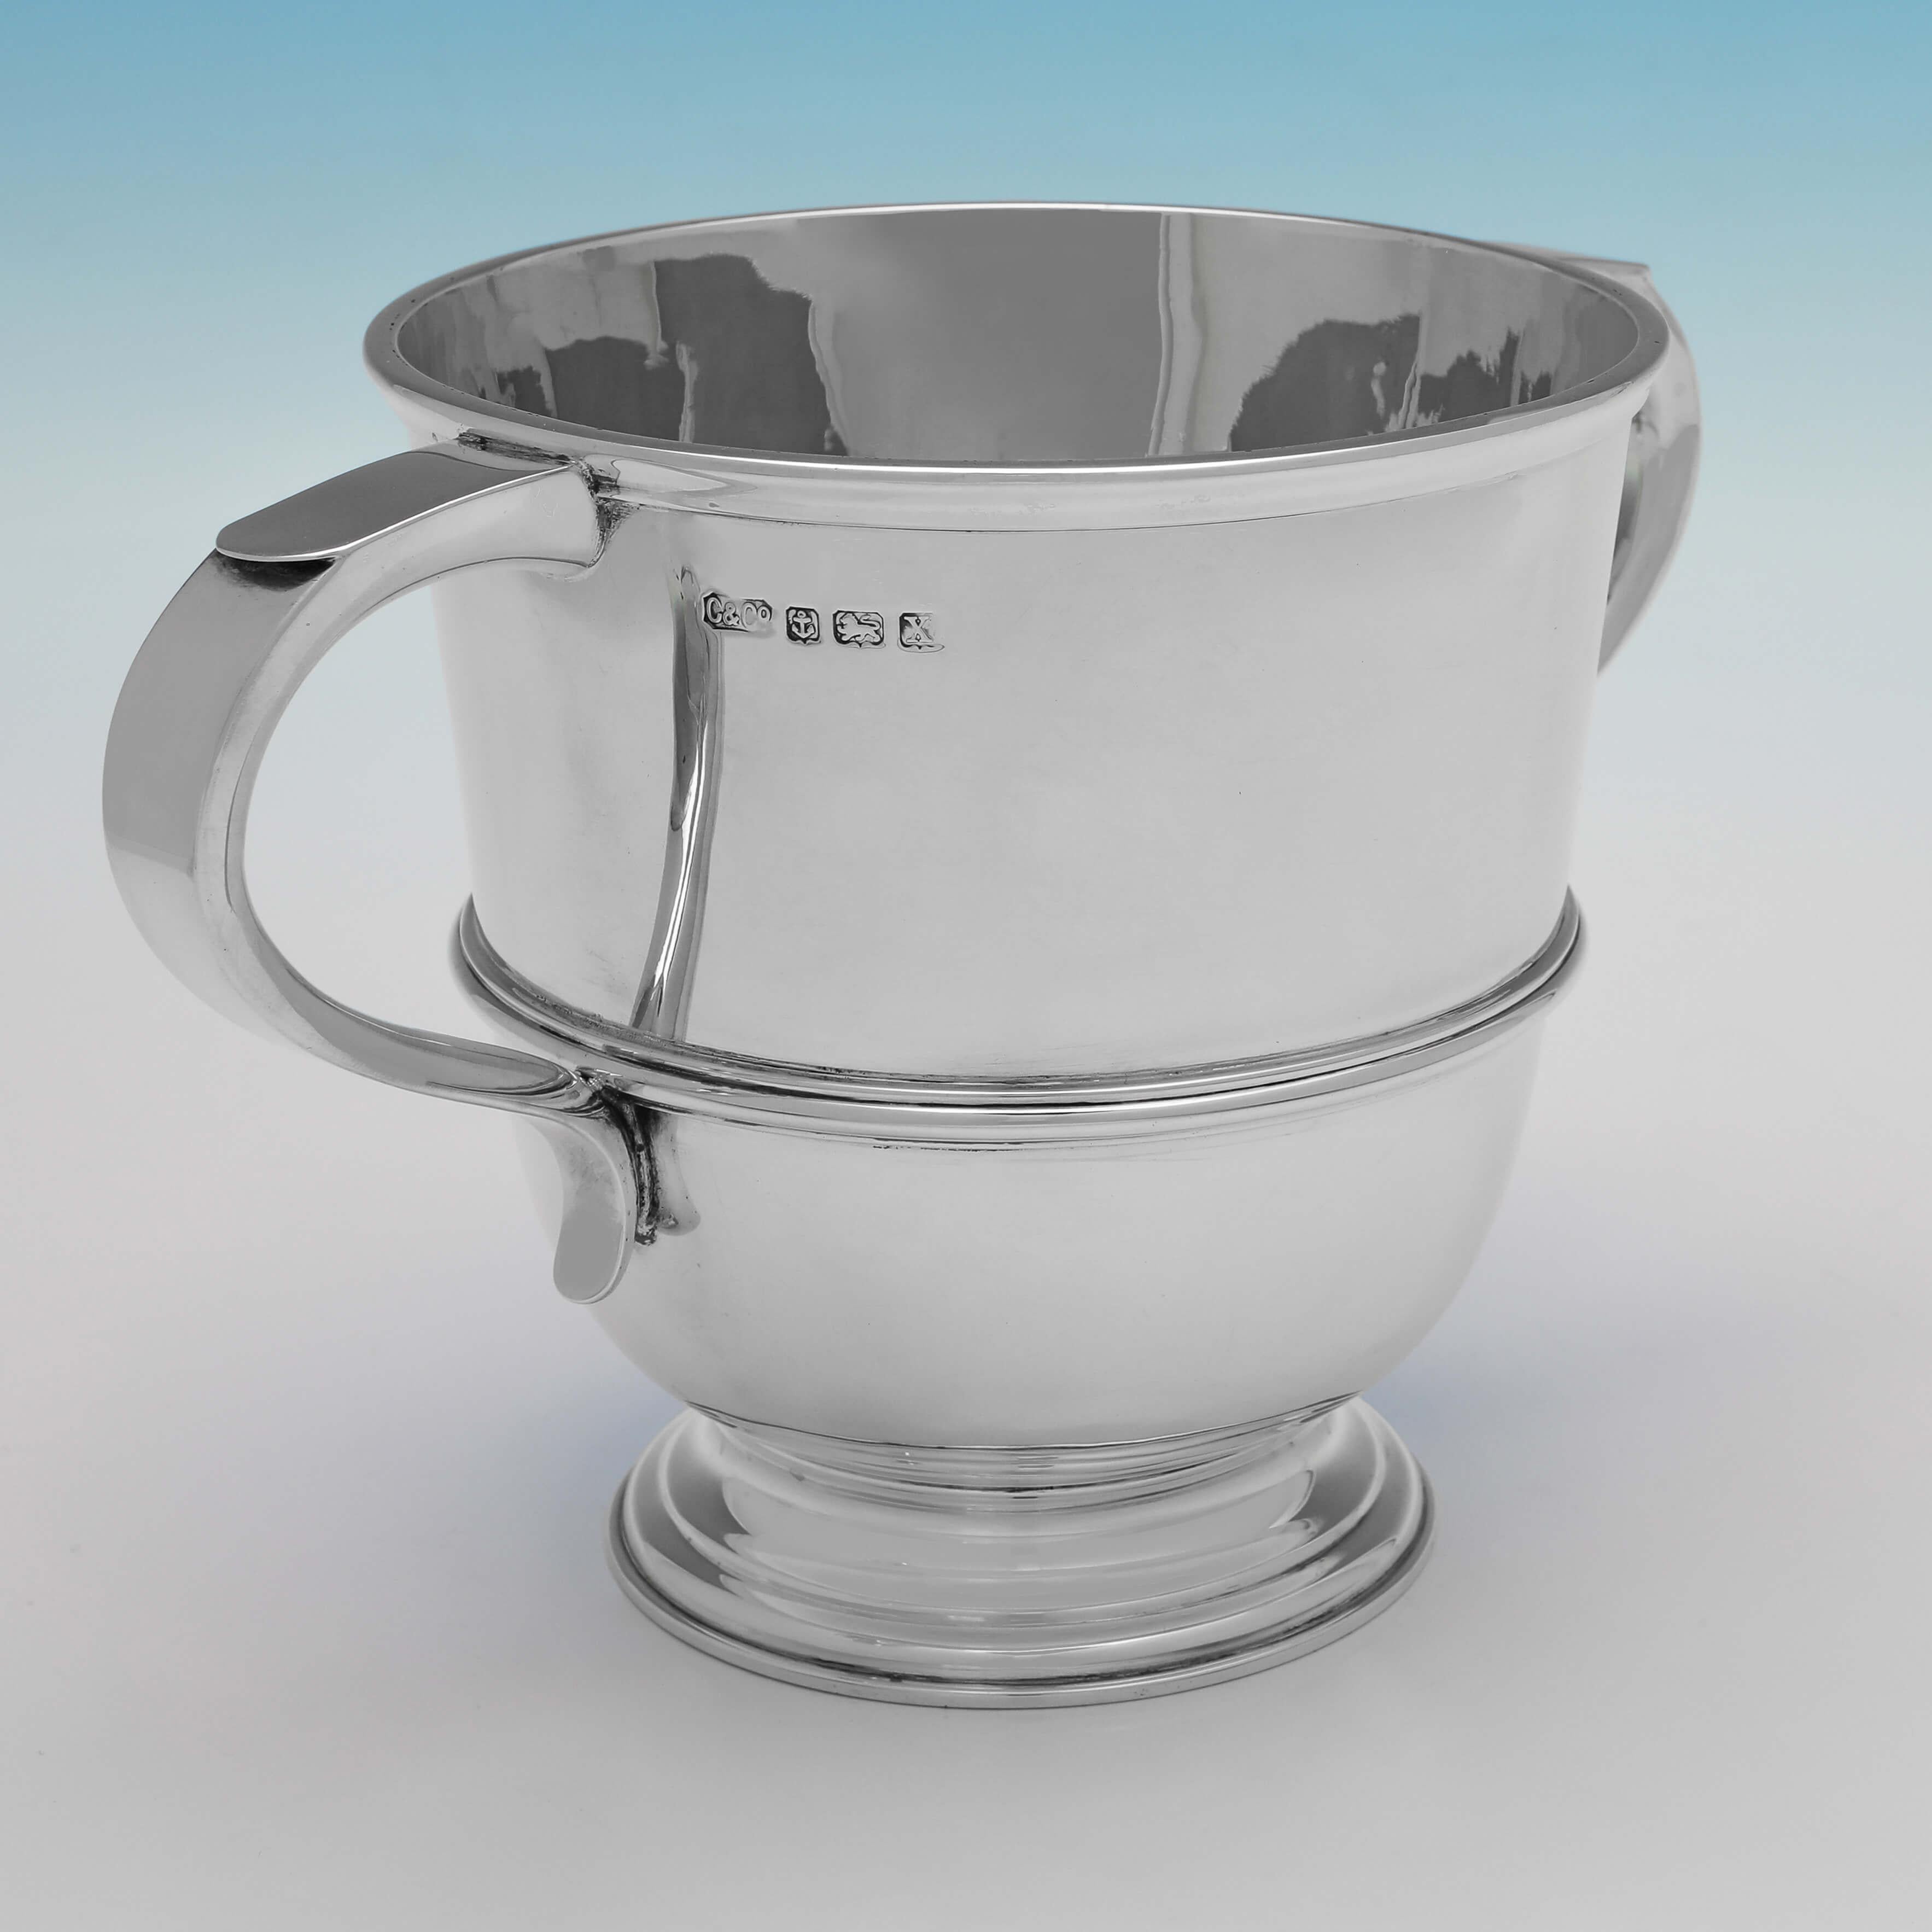 Hallmarked in London in 1922 by Carrington & Co., this handsome, Antique Sterling Silver Trophy Cup, is plain in design with a reed band around the centre. 

The cup measures 5.5